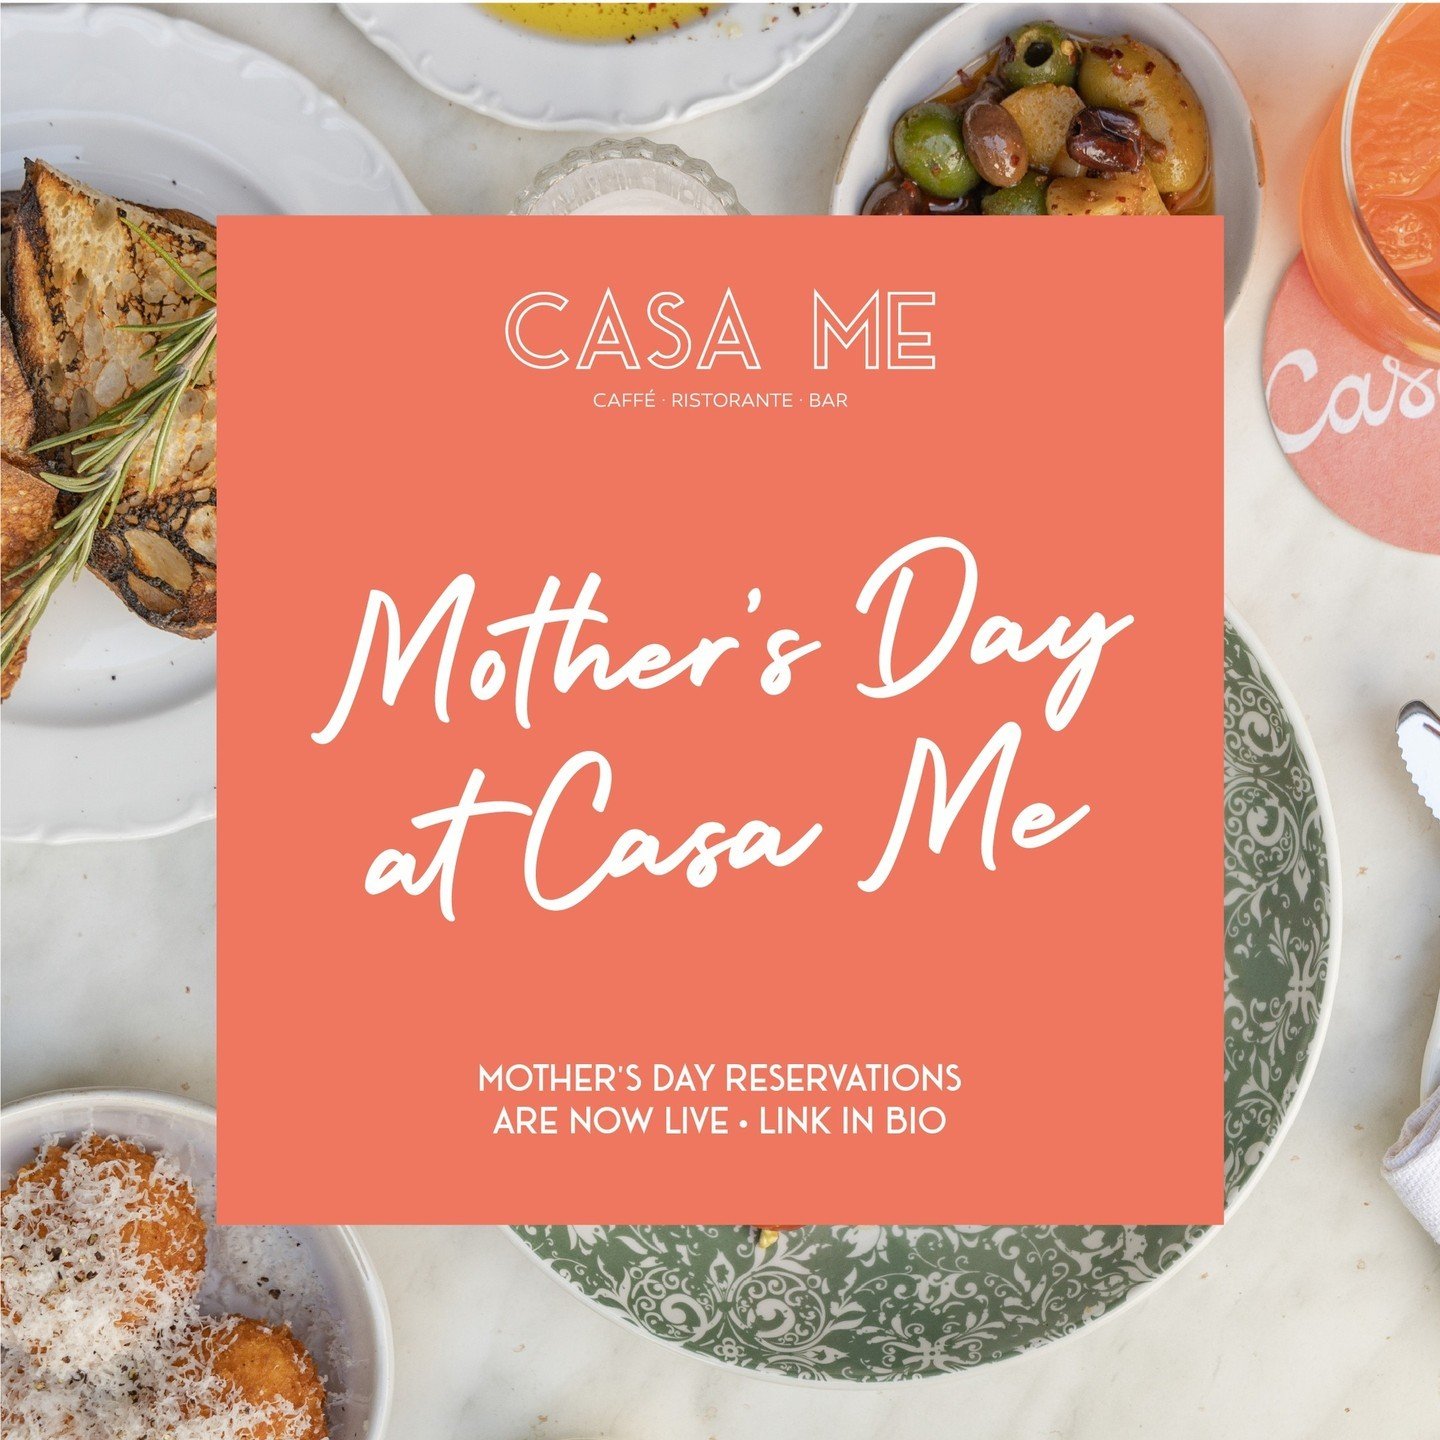 Treat mom to lunch or dinner at Casa Me🤍⁠
⁠
Mother's Day reservations are live! Reserve your table through the link in our bio.